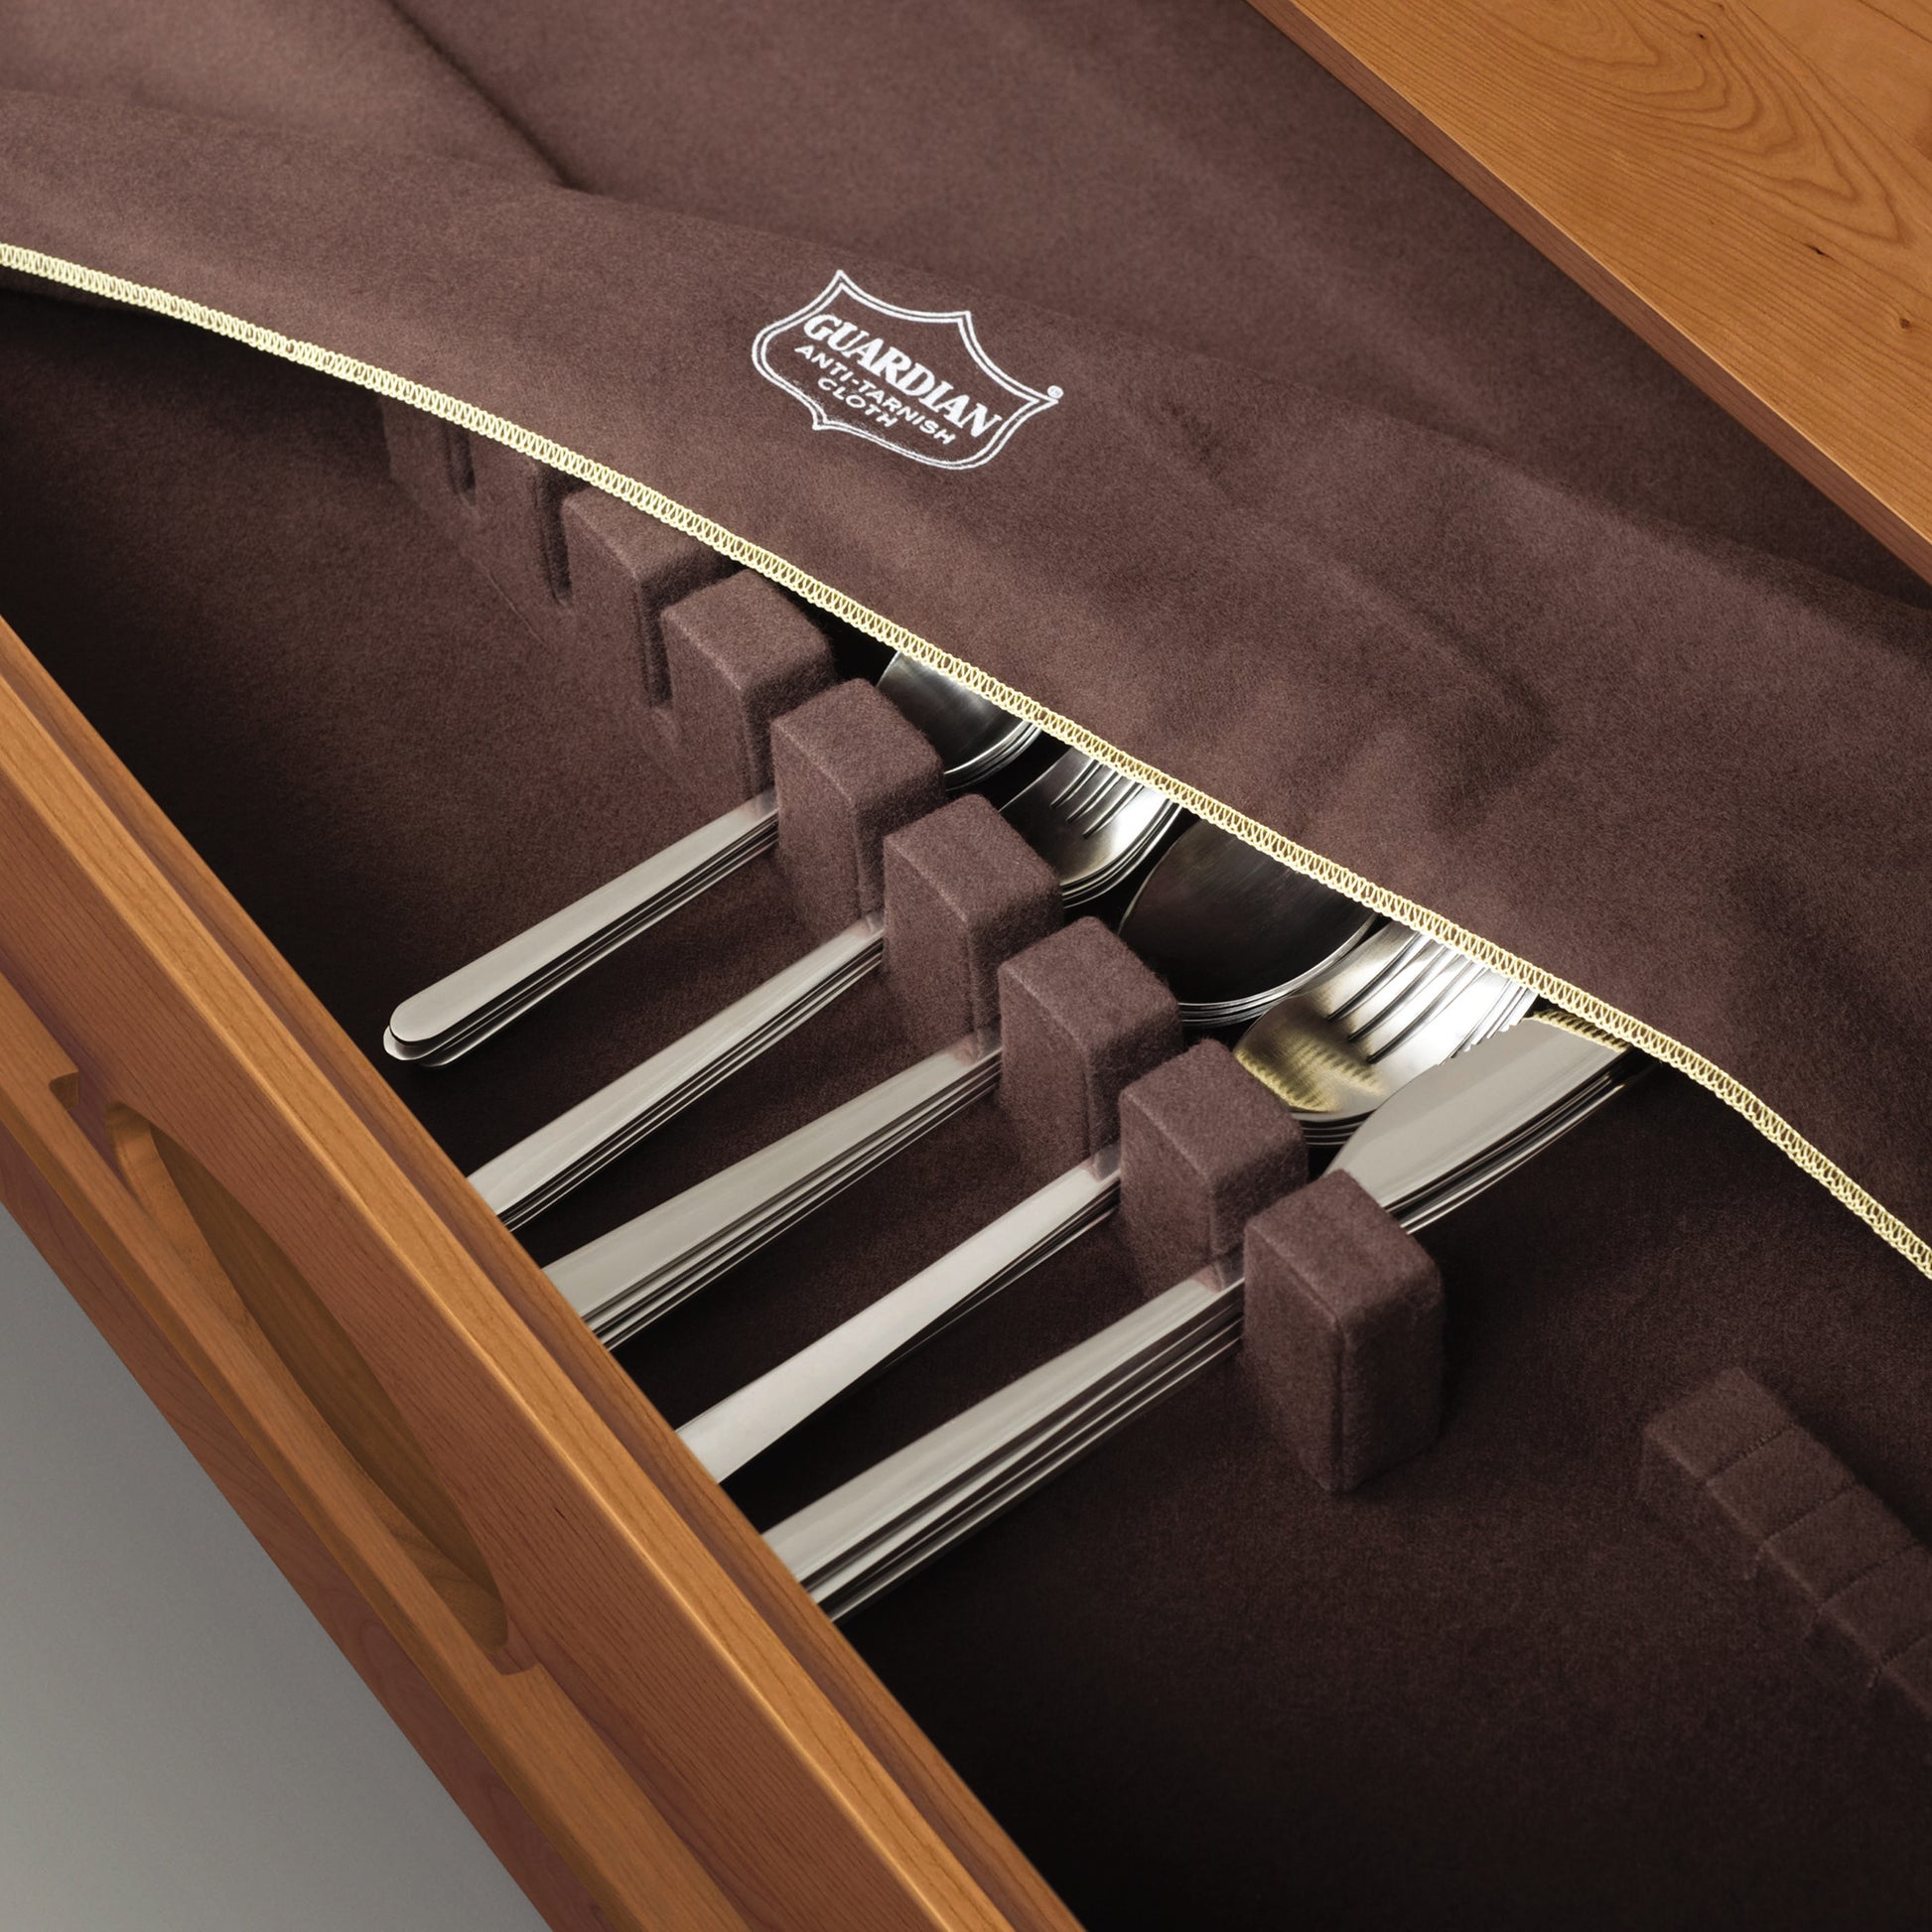 A set of silver cutlery neatly placed in a wooden Copeland Furniture storage case, lined with protective brown fabric.